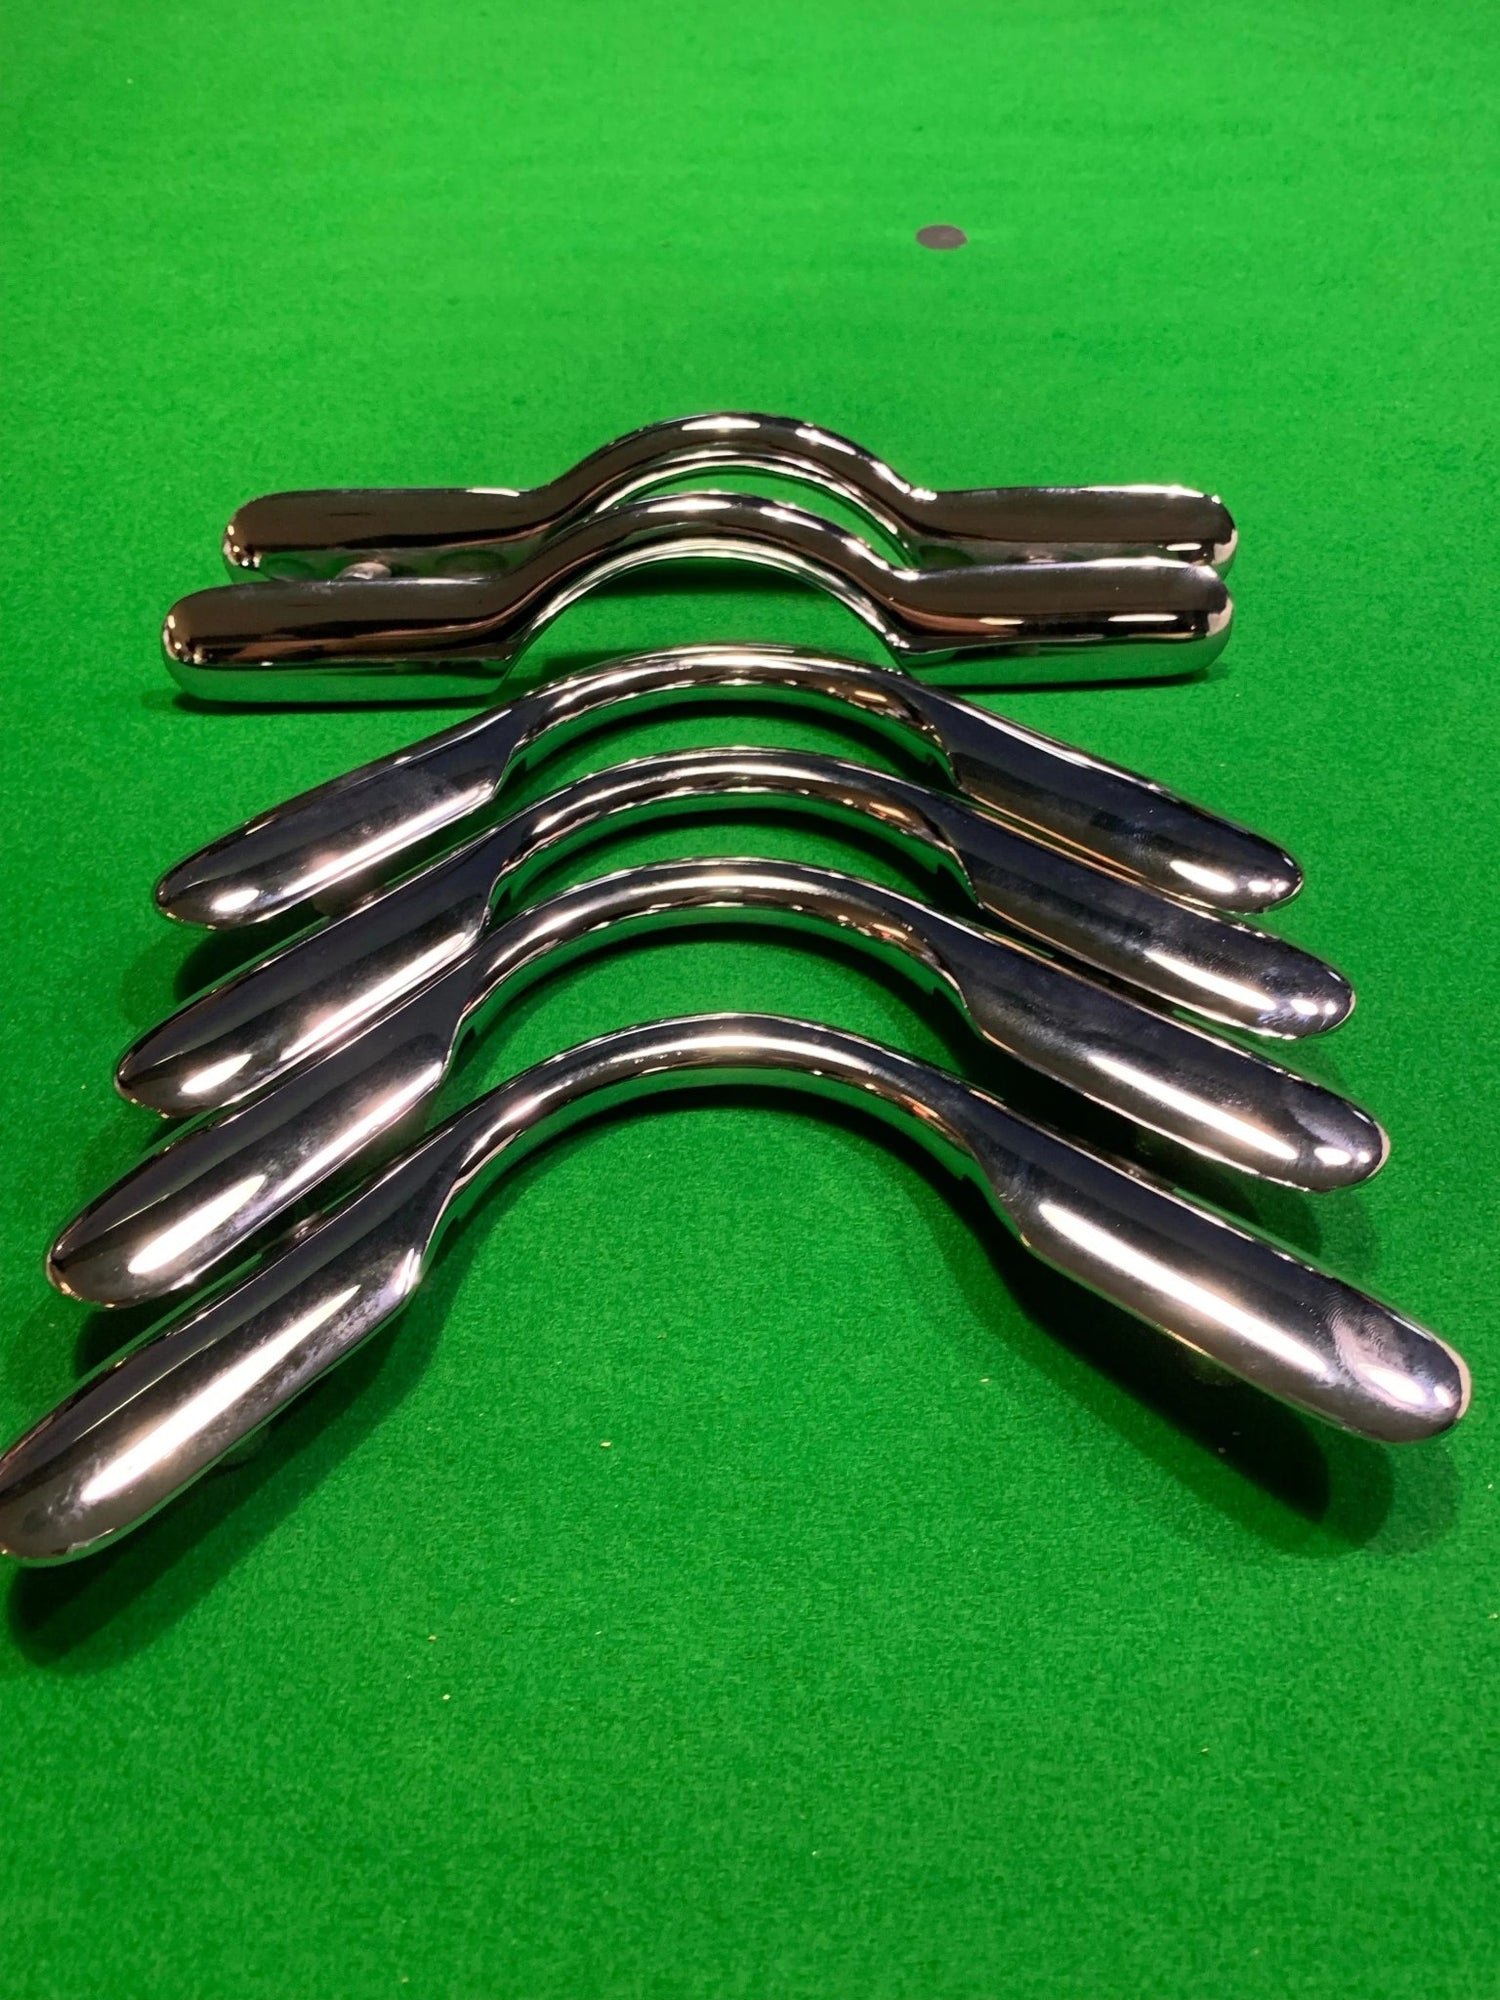 Deluxe Quality Solid Pool, Snooker, Billiard Table Pocket Brackets Heavy Boss Round - Q-Masters